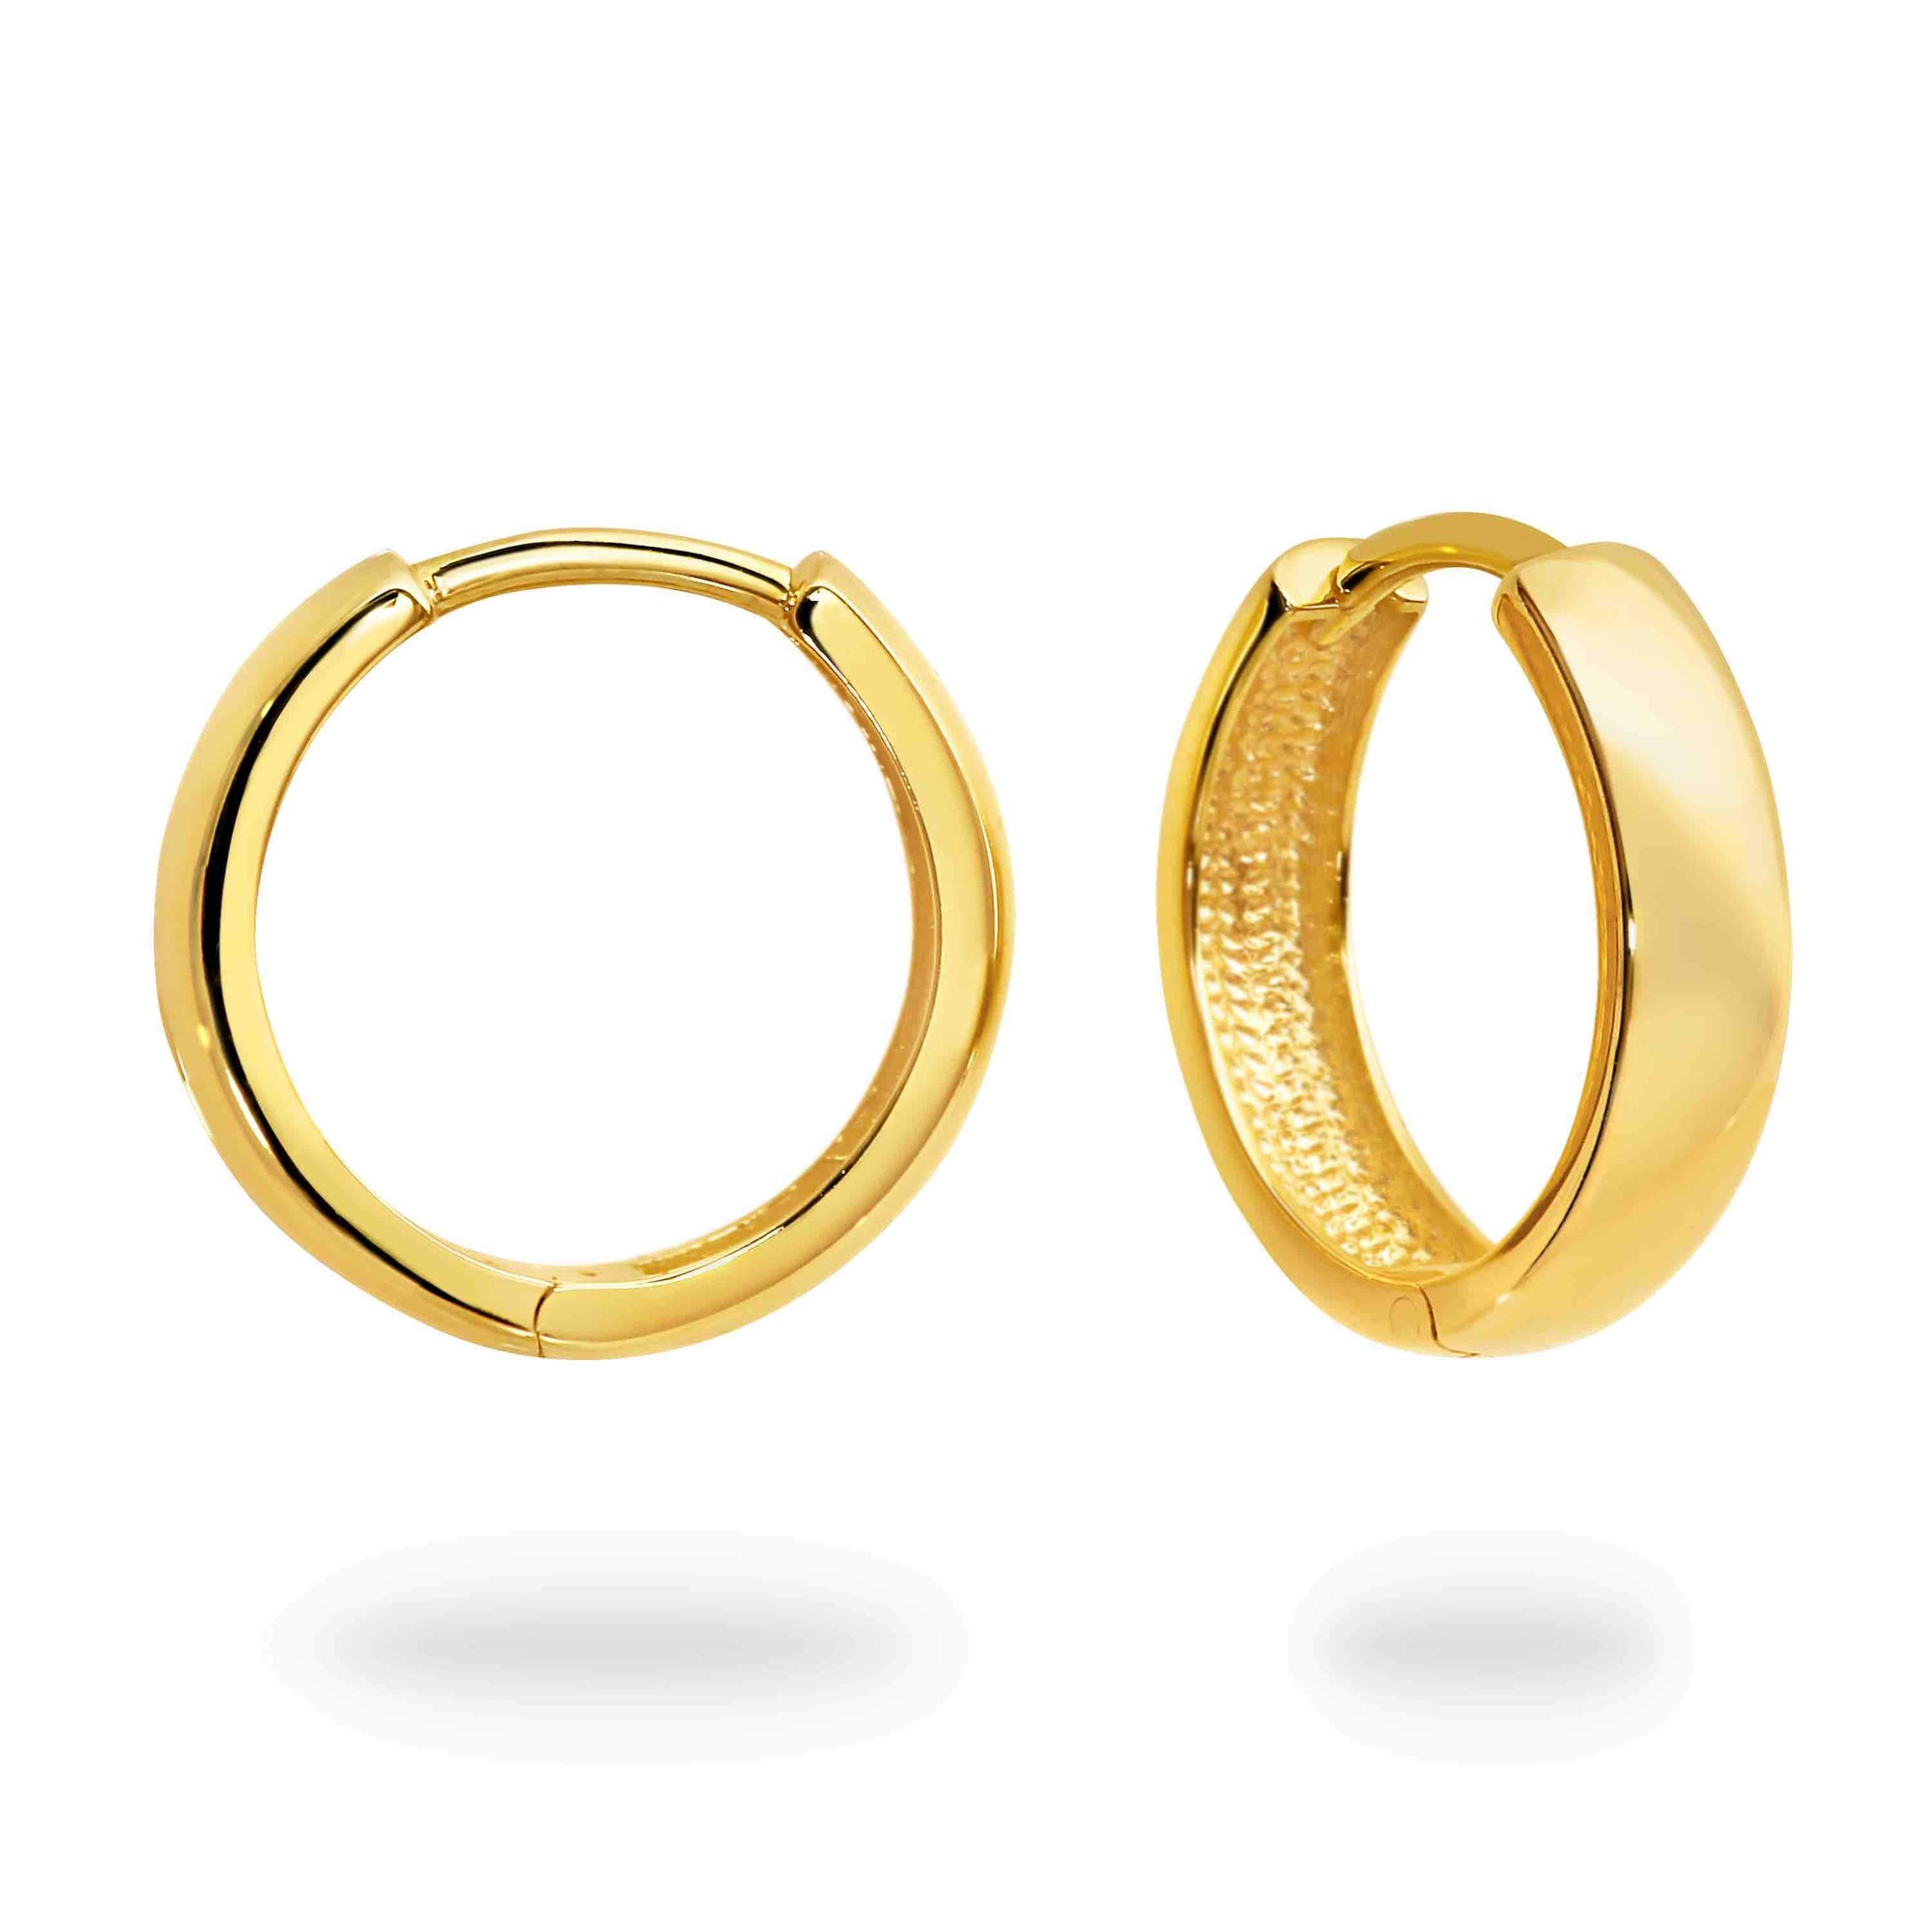 Duo Jewellery Earrings Duo Solid 9ct Yellow Gold Hoops (15.2mm)